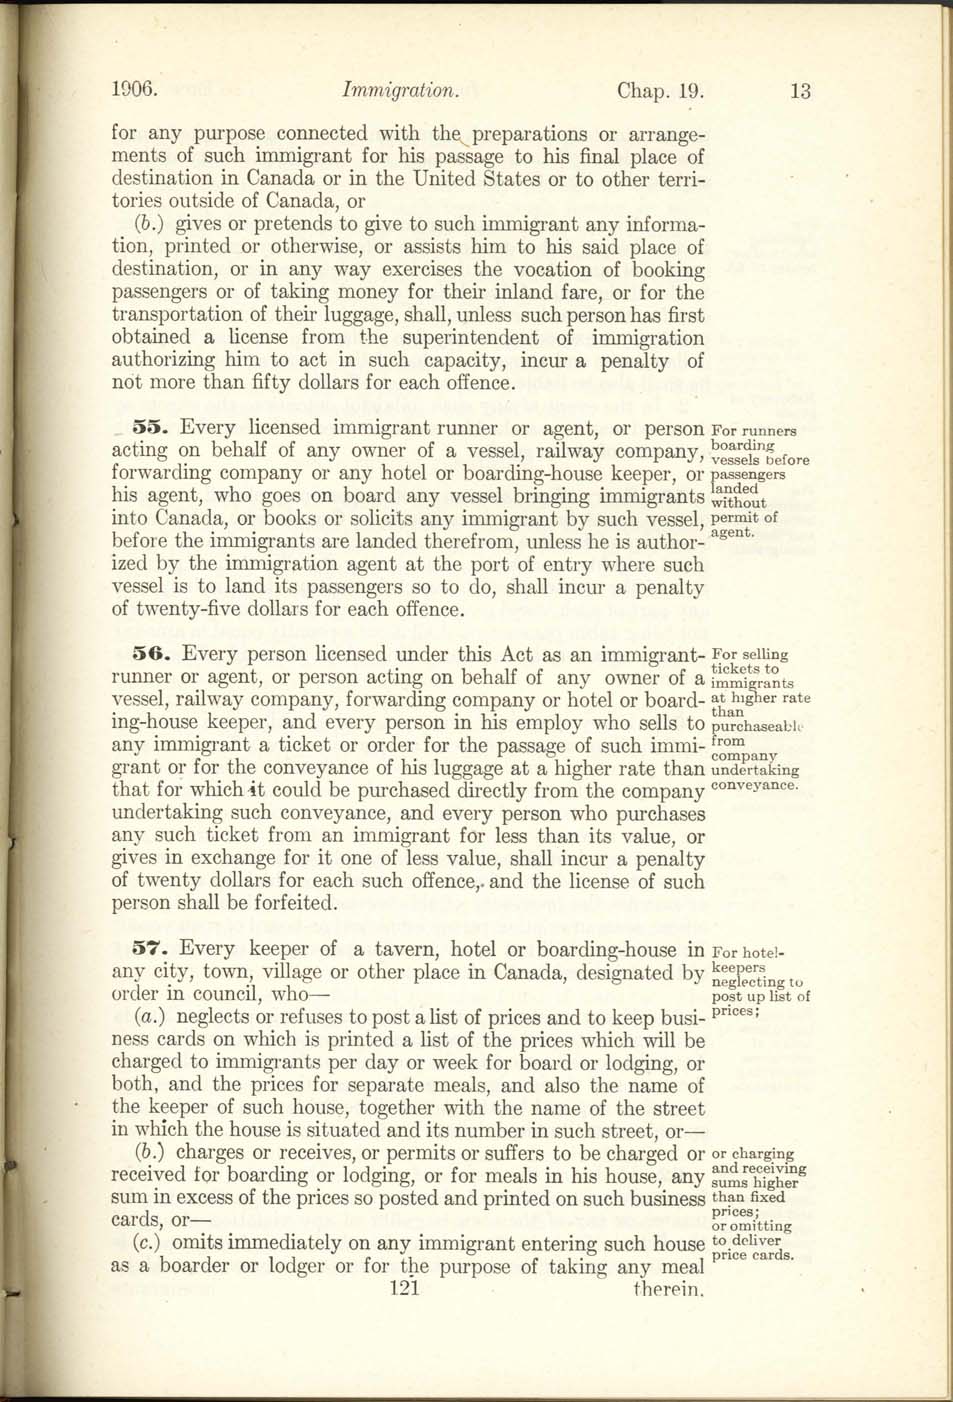 Chap. 19 Page 121 Immigration Act, 1906